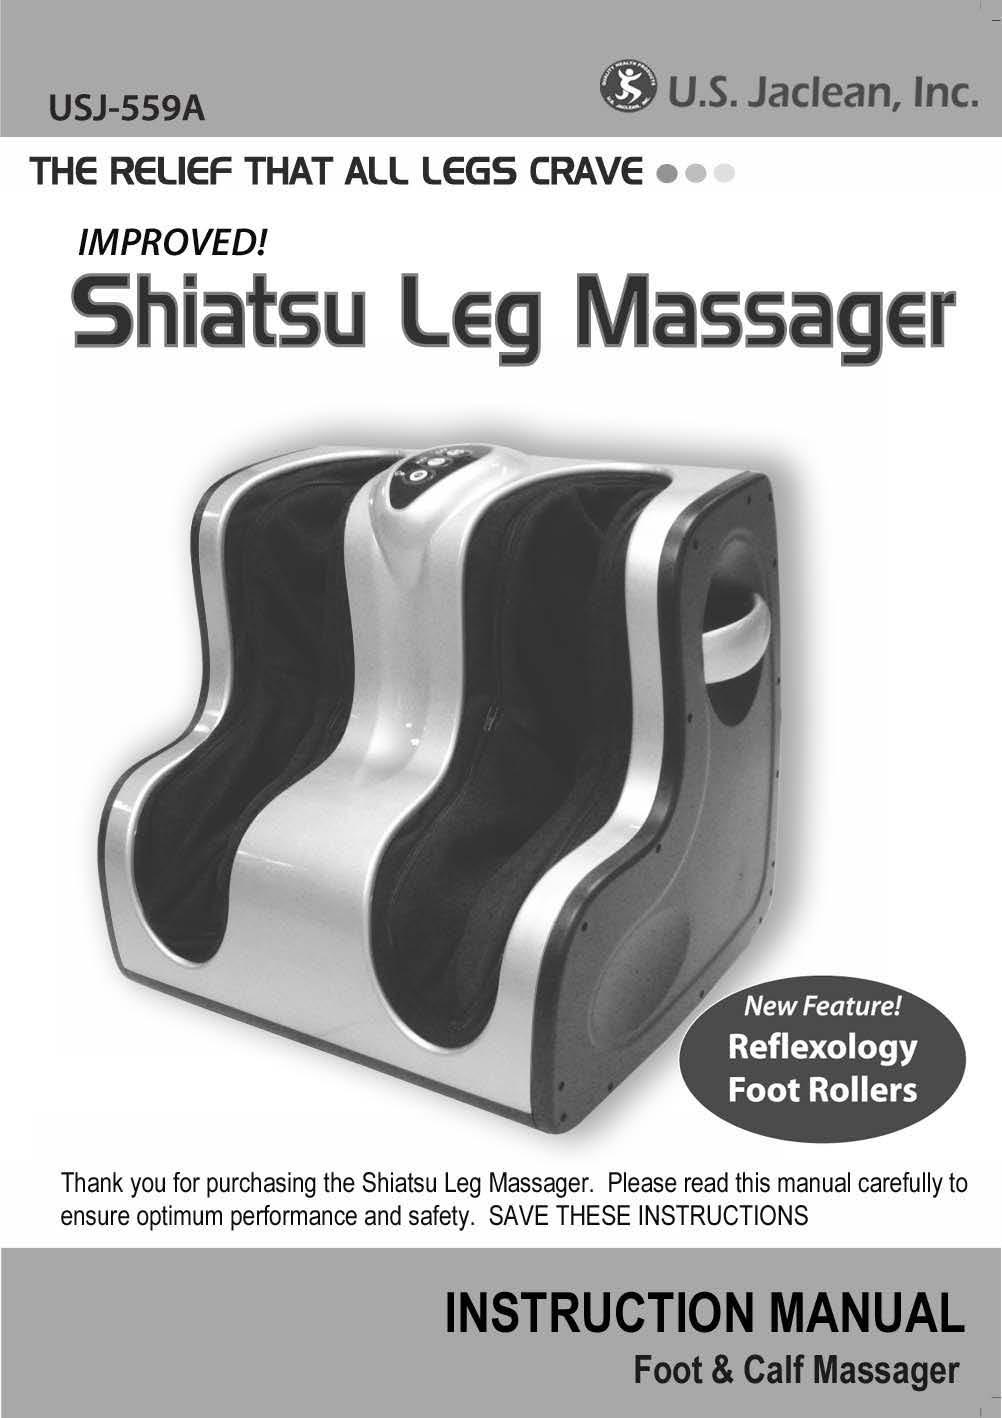 USJ-559A THE RELIEF THAT ALL LEGS CRAVE IMPROVED! hi tsu G U.S. Jaclean, Inc. eg M 55 ger Thank you for purchasing the Shiatsu Leg Massager.